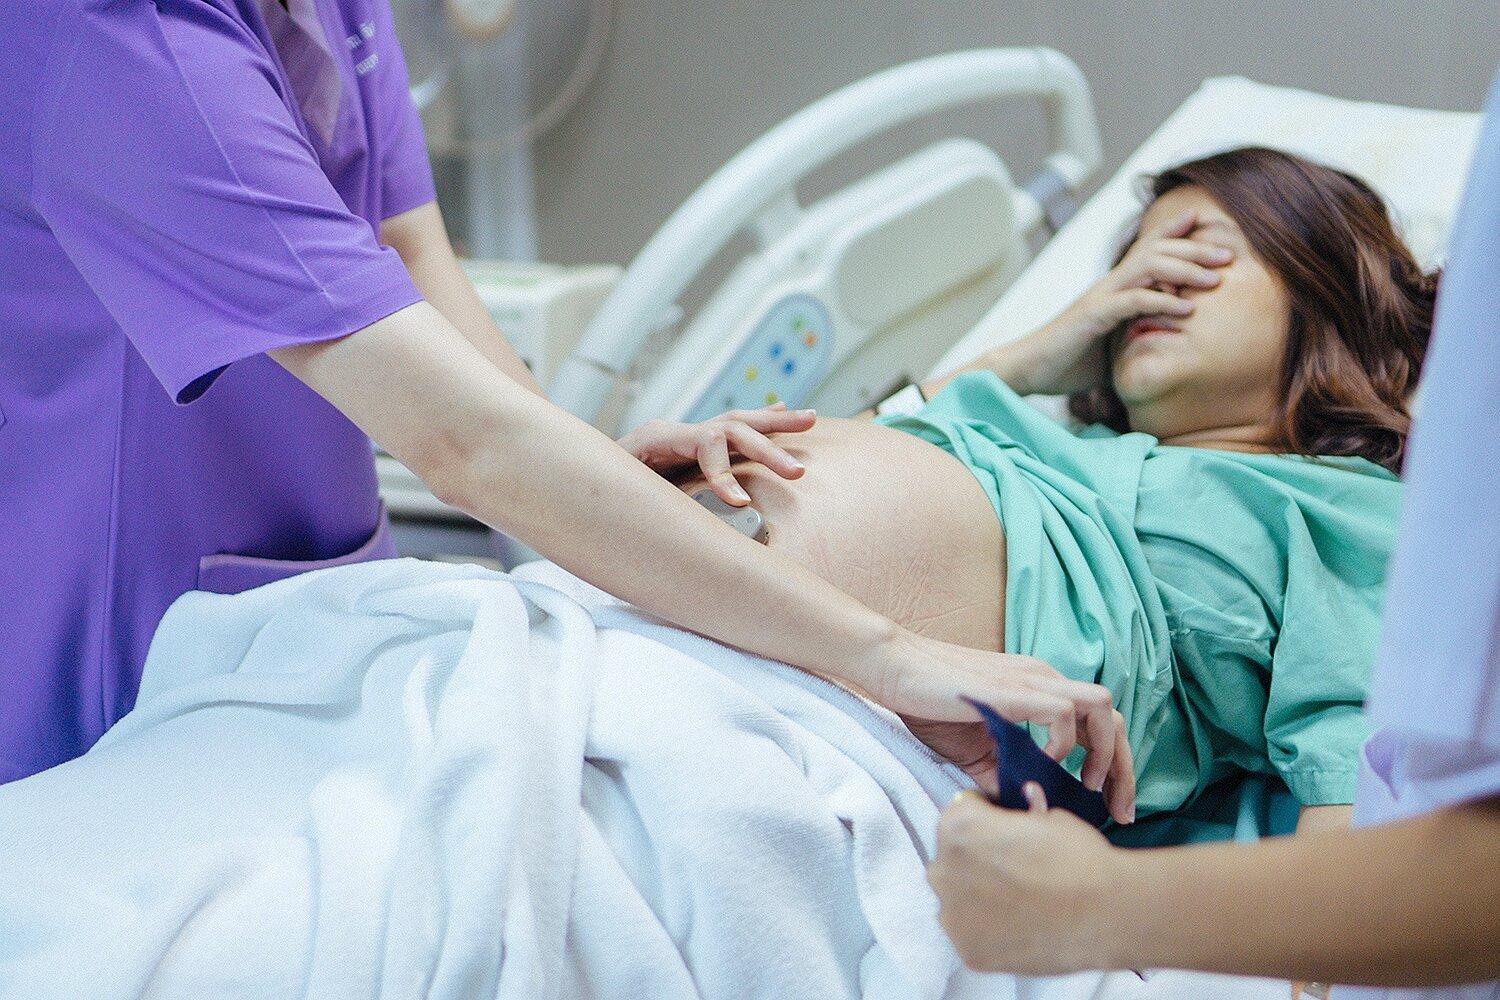 Pregnant Women Are at a Higher Chance of Death from COVID â Though the ...